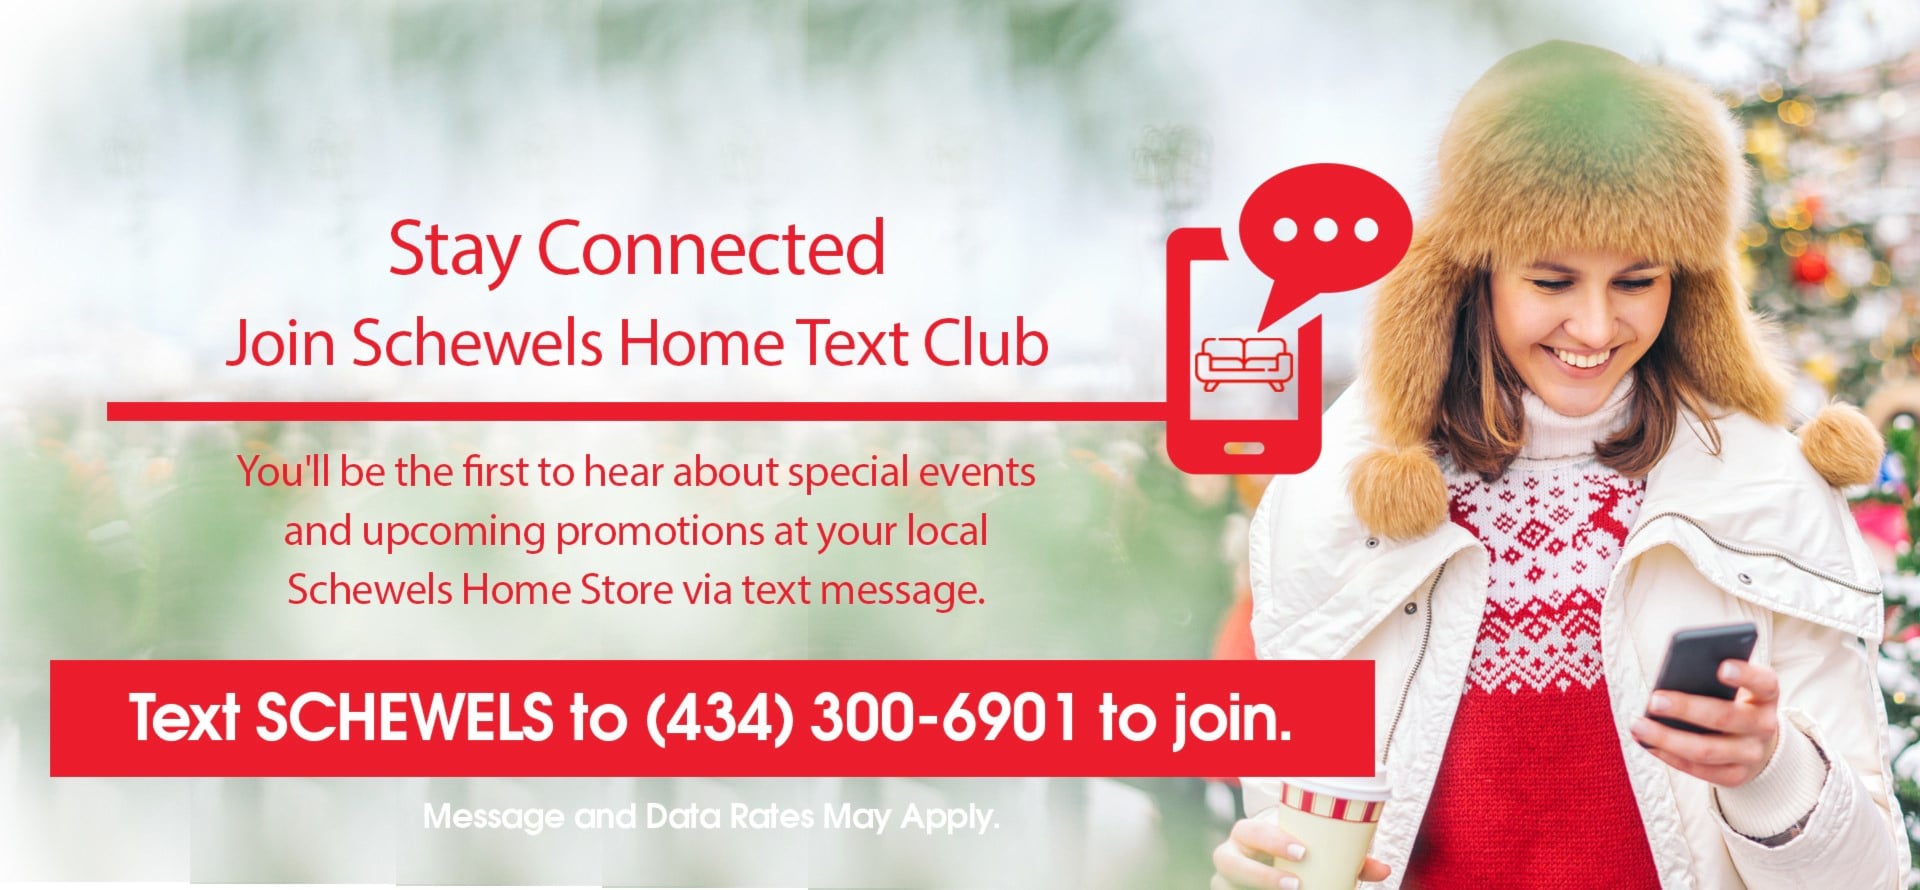 Stay Connected Join Schewel's Home Text Club | You'll be the first to hear about special events and upcoming promotions at your local Schewels Home Store via text message | Text SCHEWELS to 4343006901 to join. | Message and data rates may vary.